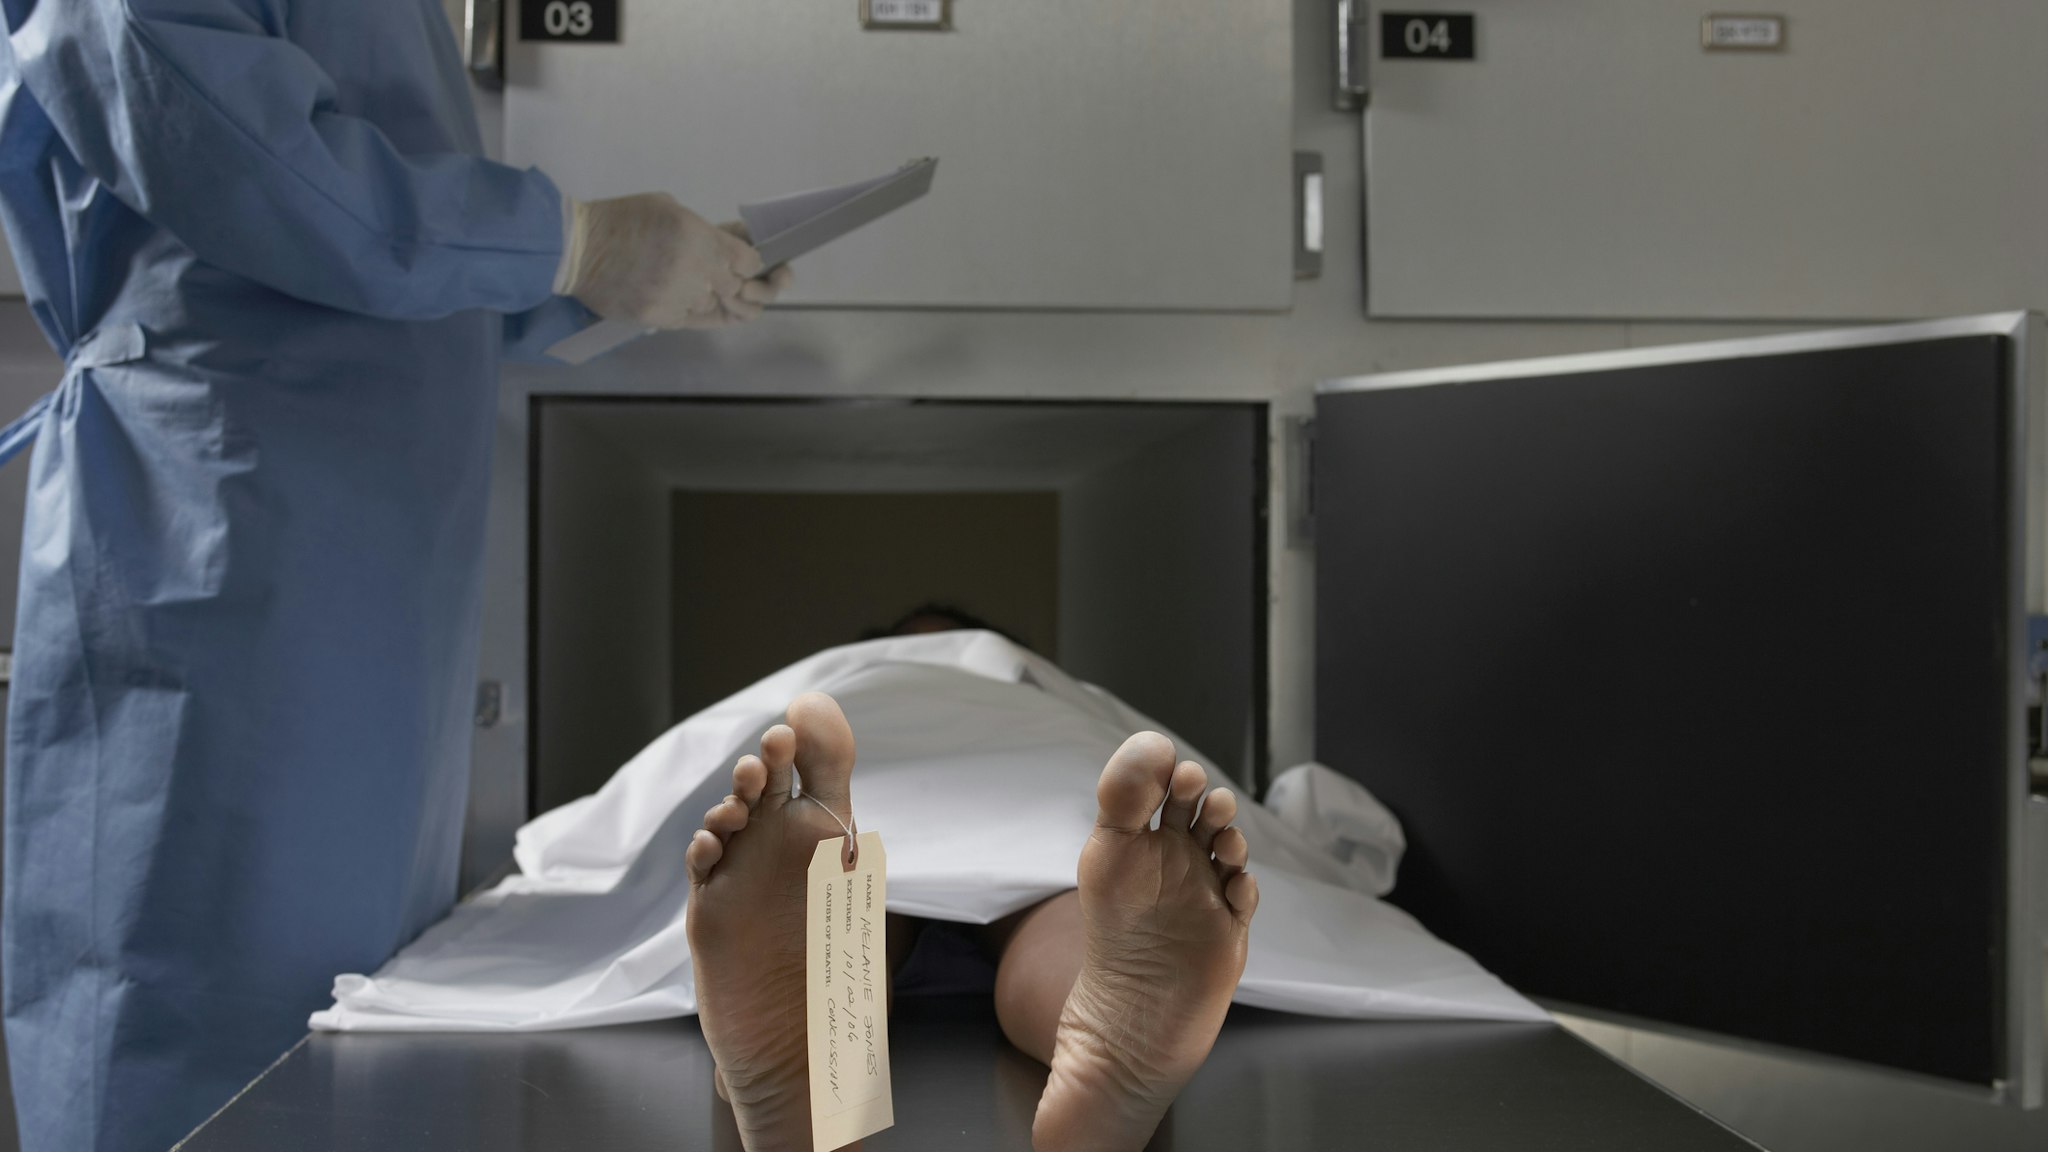 "Cadaver on autopsy table, label tied to toe, close-up" - stock photo